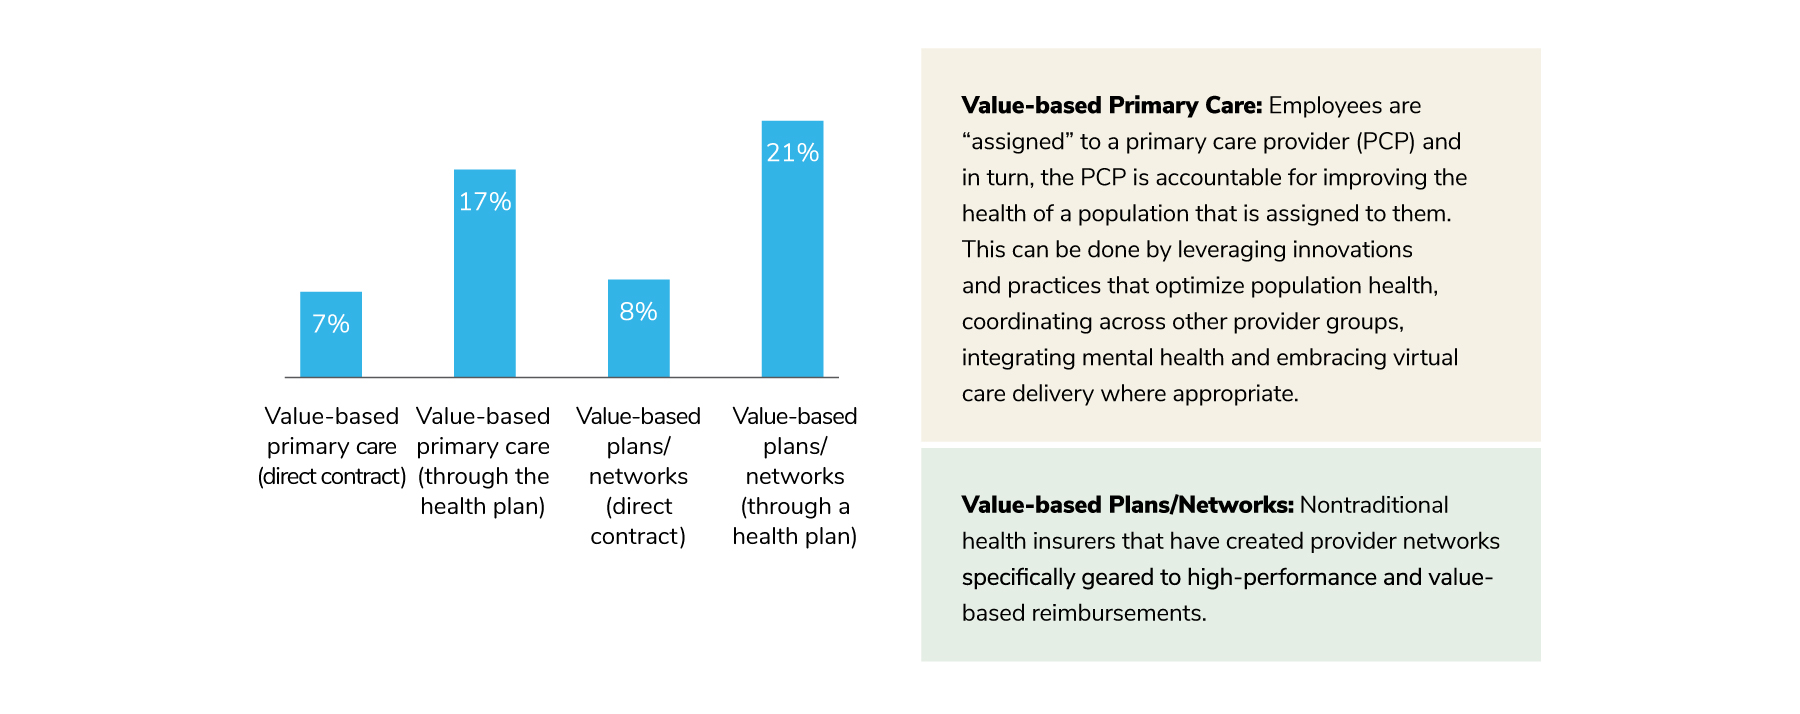 Some employers offer value-based primary care (7% direct contract/17% through the health plan) and value-based plans/networks (8% direct contract/21% through the health plan).